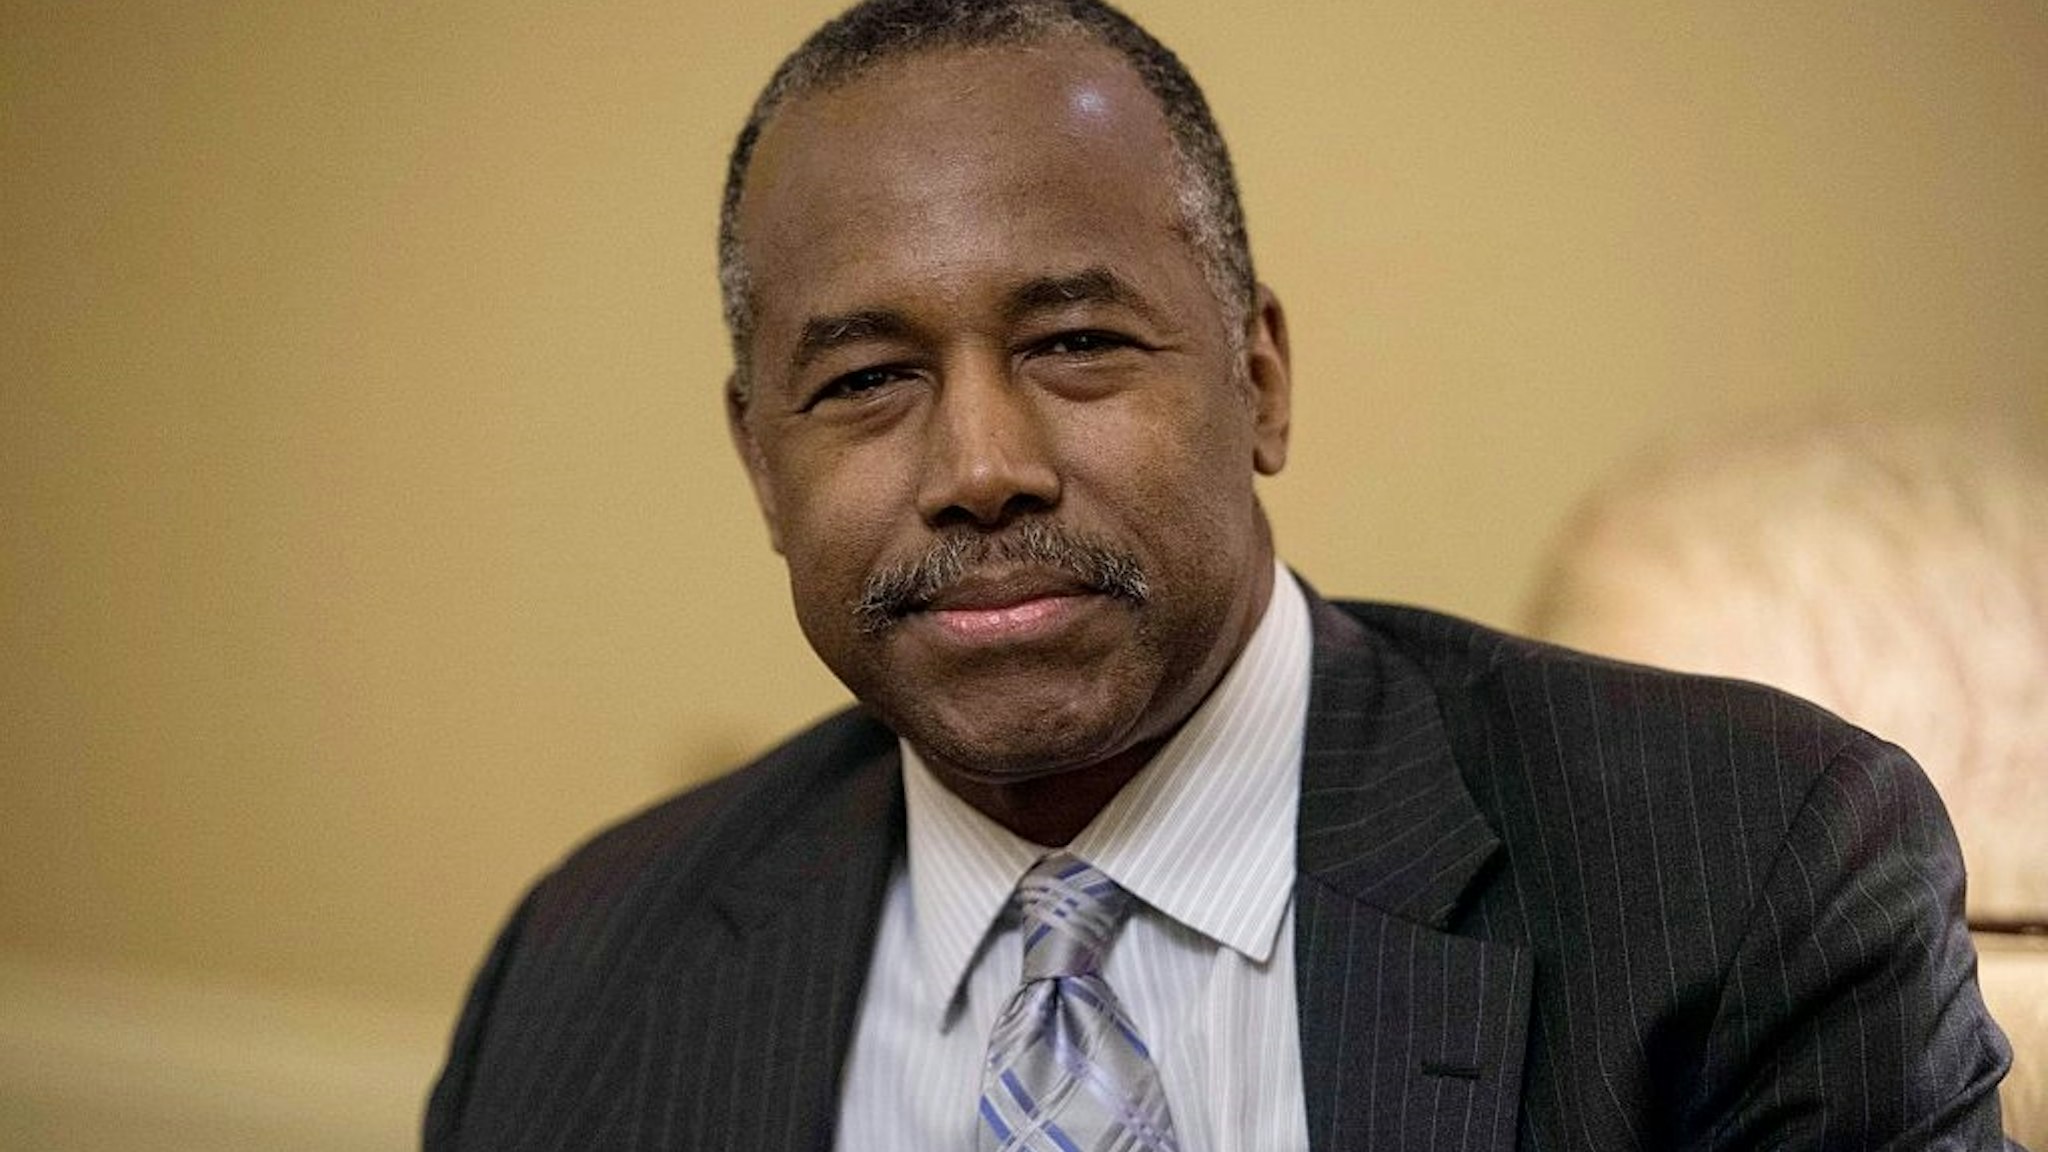 US Housing and Urban Development (HUD) Secretary nominee Ben Carson poses for photos before a meeting with Senate Majority Leader Mitch McConnell at the Capitol in Washington, DC, on December 7, 2016.